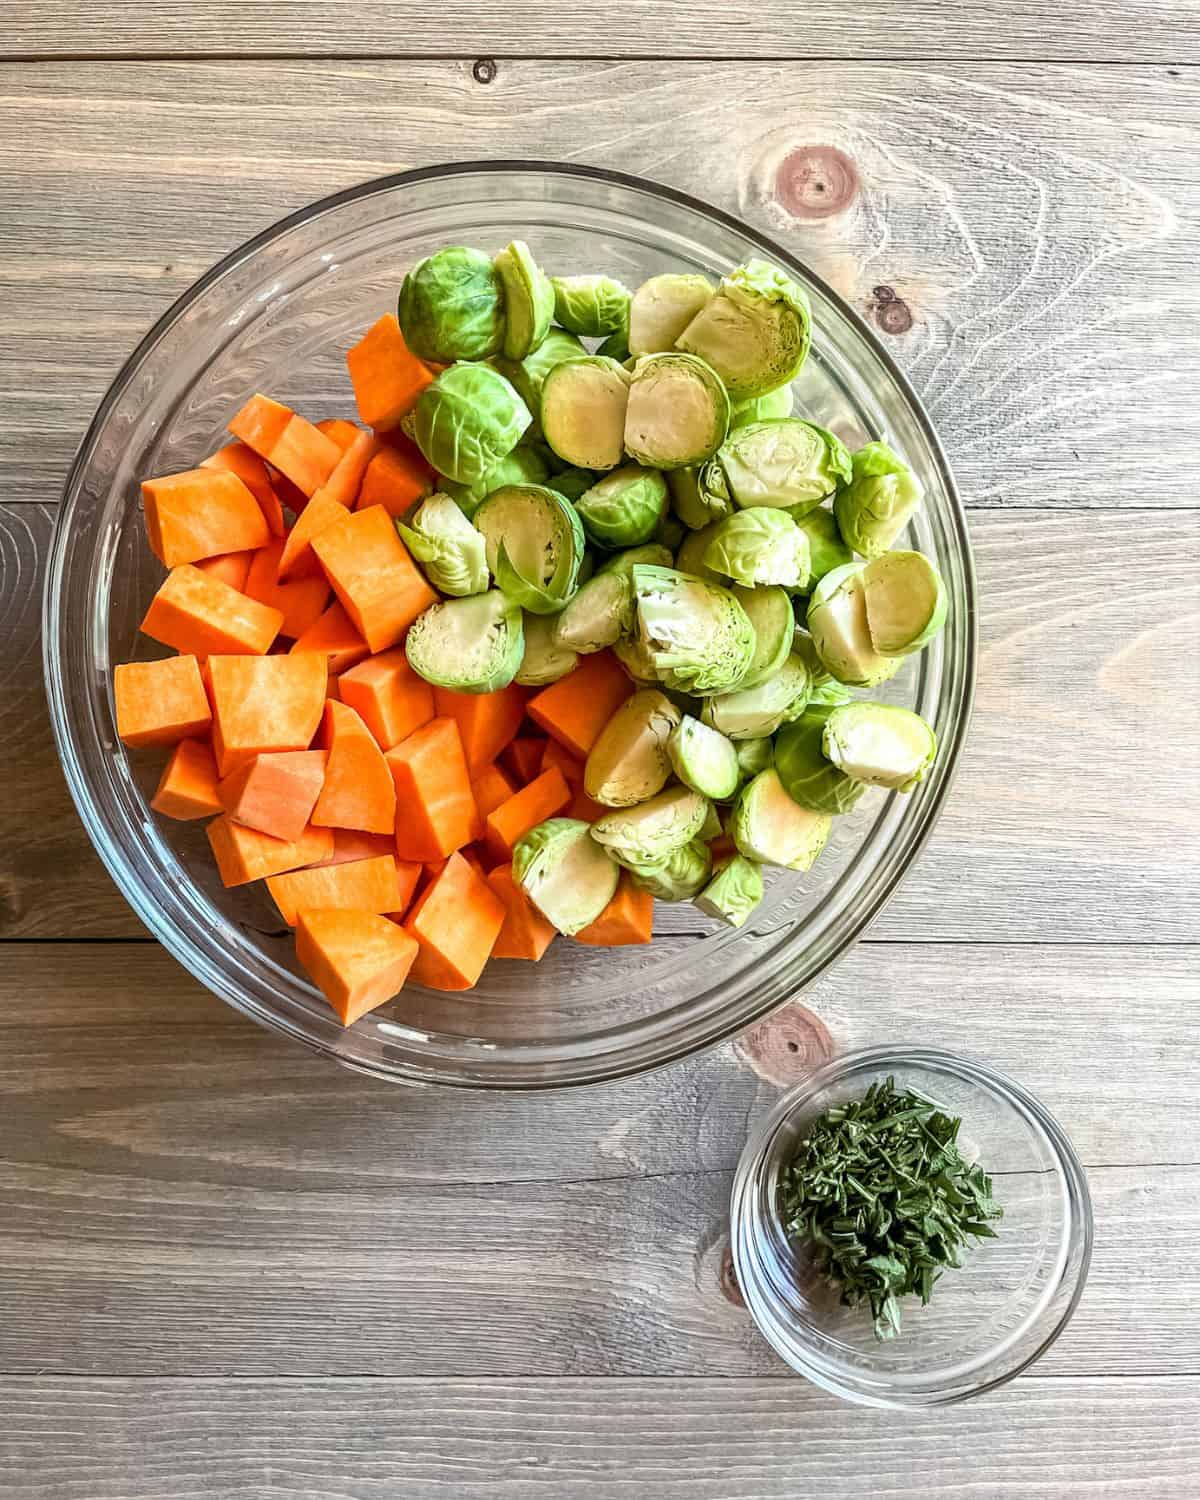 Chopped vegetables and chopped herbs in glass bowls.